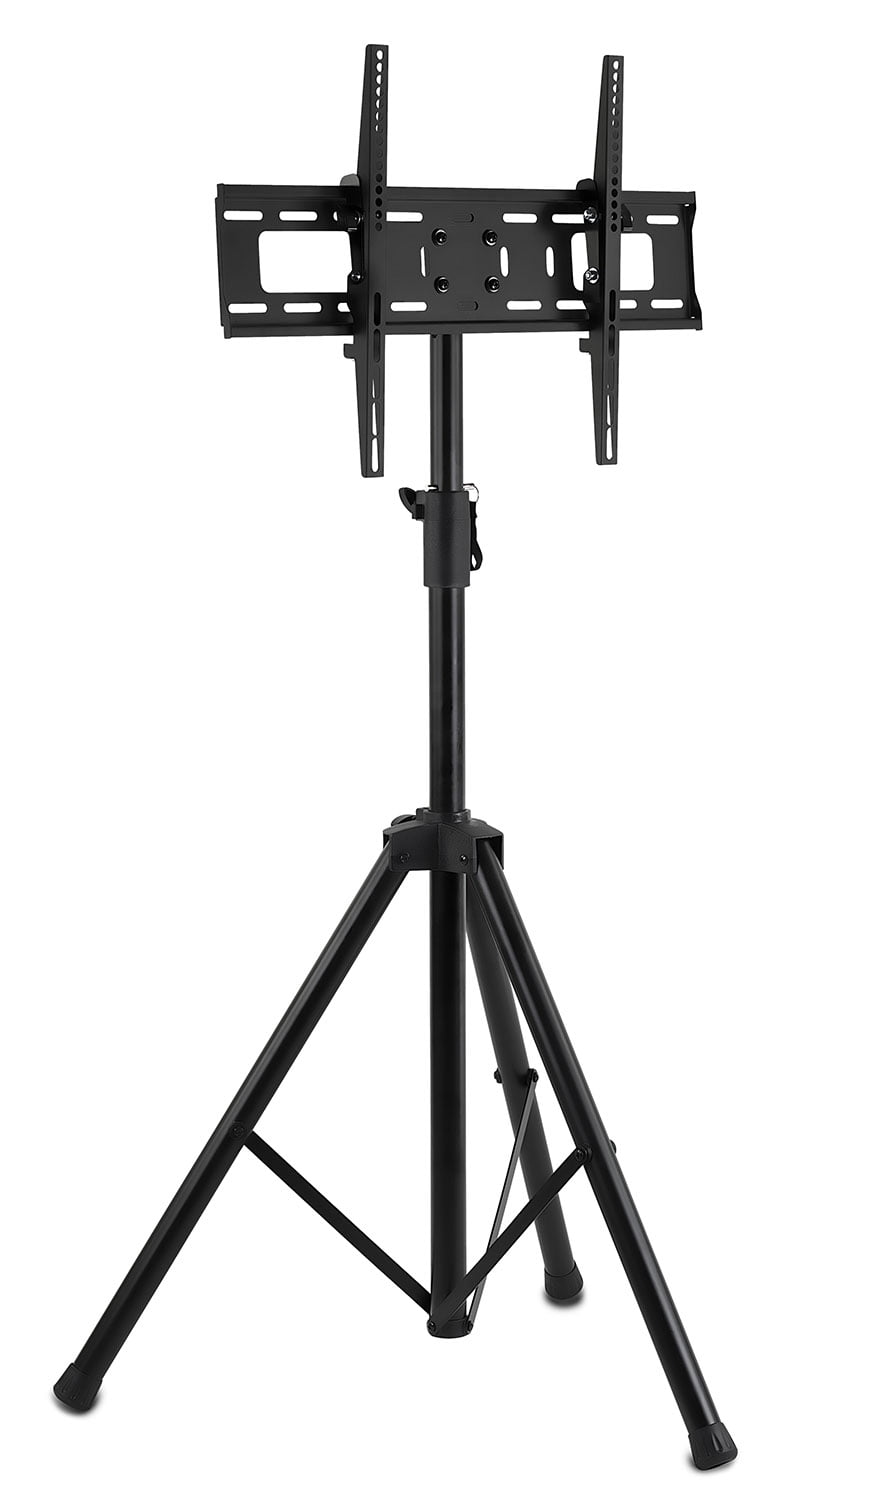 Details about   Portable TV Tripod Stand for 32-55 inch LCD LED Flat Screen TVs/Monitors 